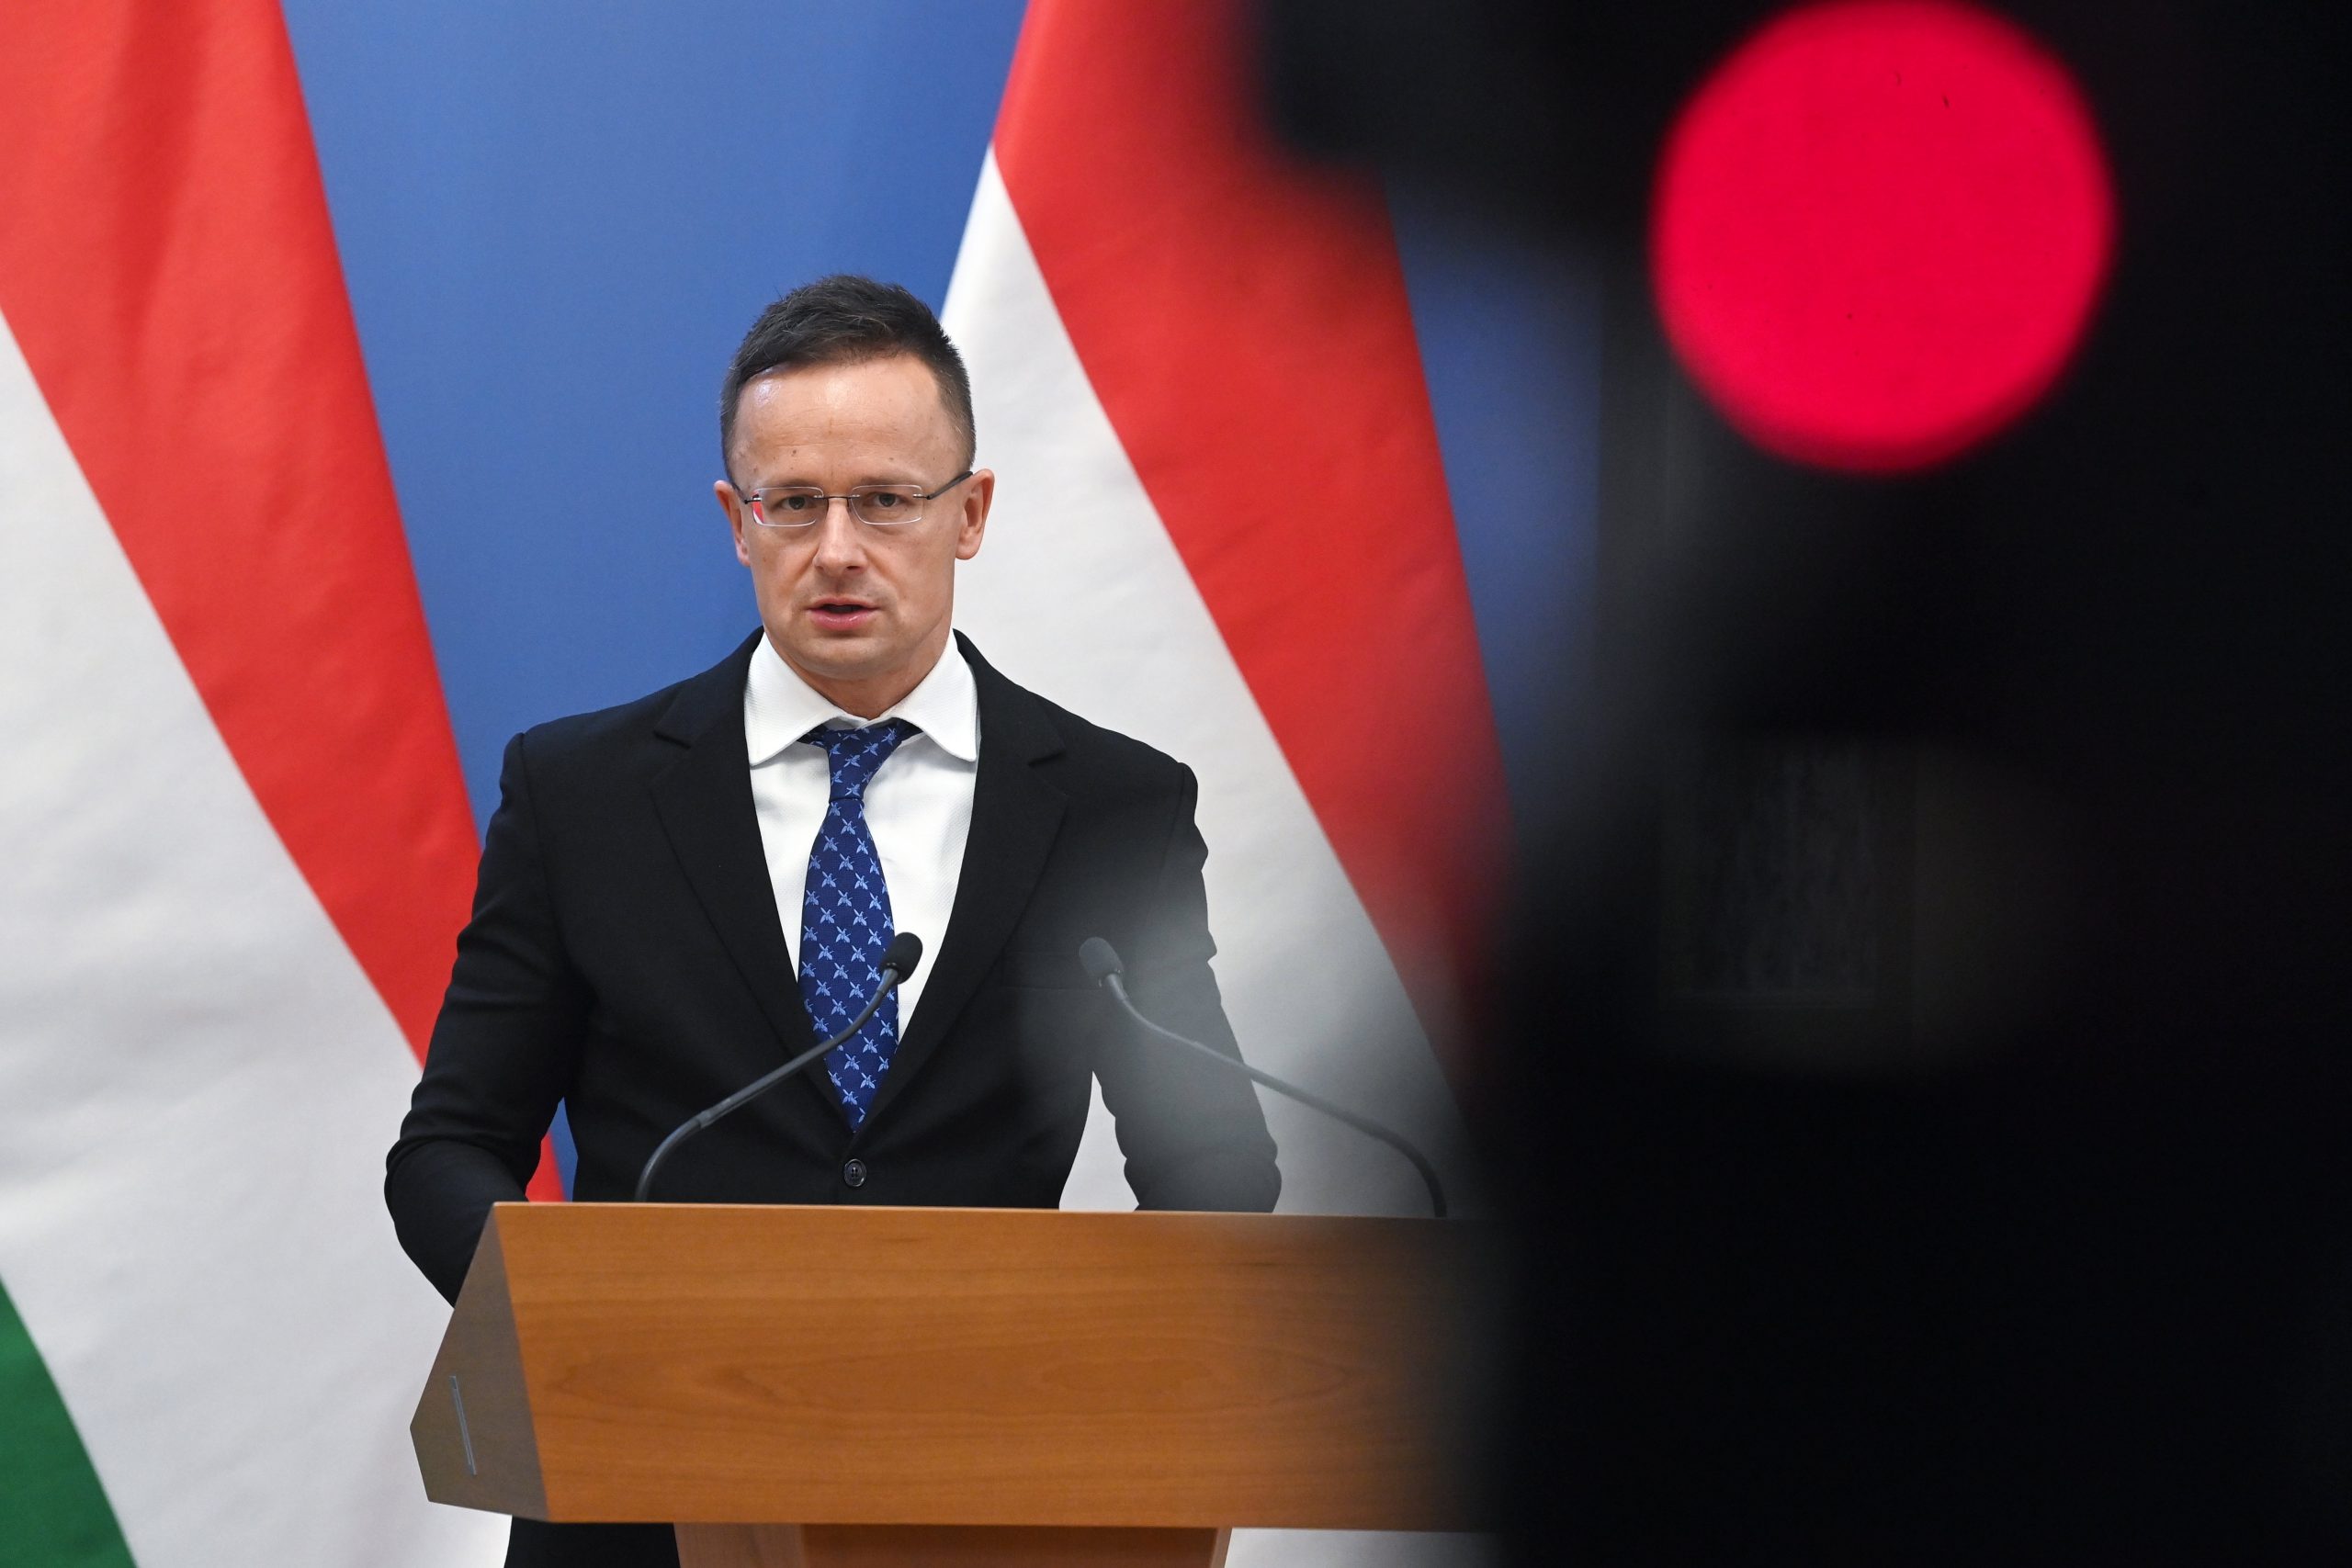 Hungary Will Not Discuss Possibility of Gas Embargo on Russia, says Foreign Minister Szijjártó